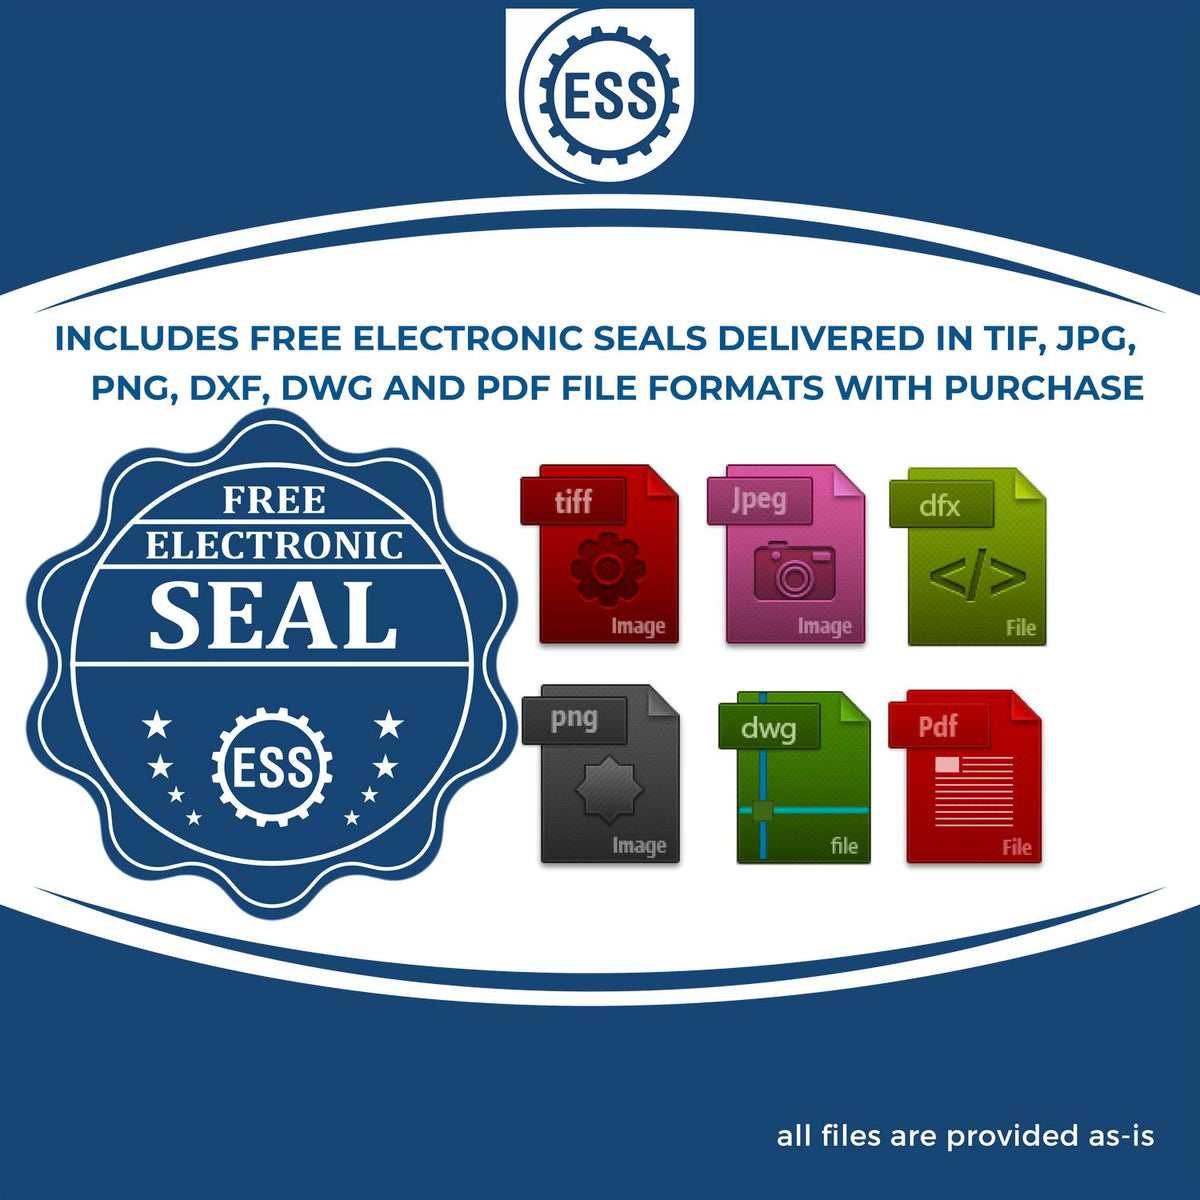 An infographic for the free electronic seal for the Soft Tennessee Professional Engineer Seal illustrating the different file type icons such as DXF, DWG, TIF, JPG and PNG.